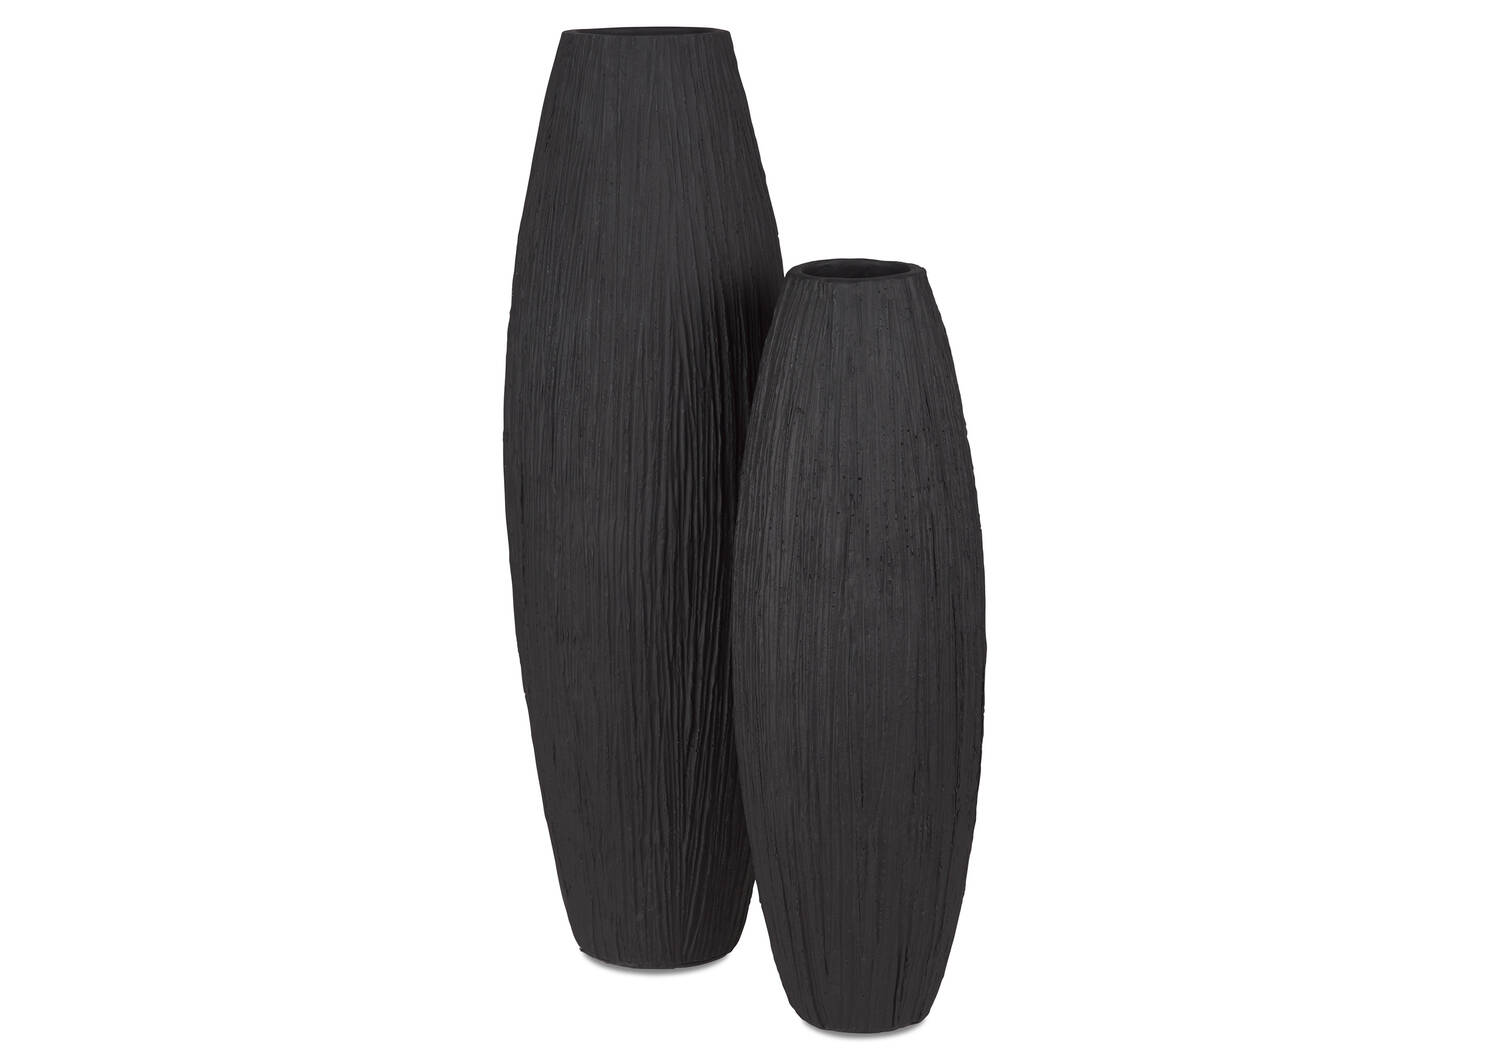 Cailee Vases -Black